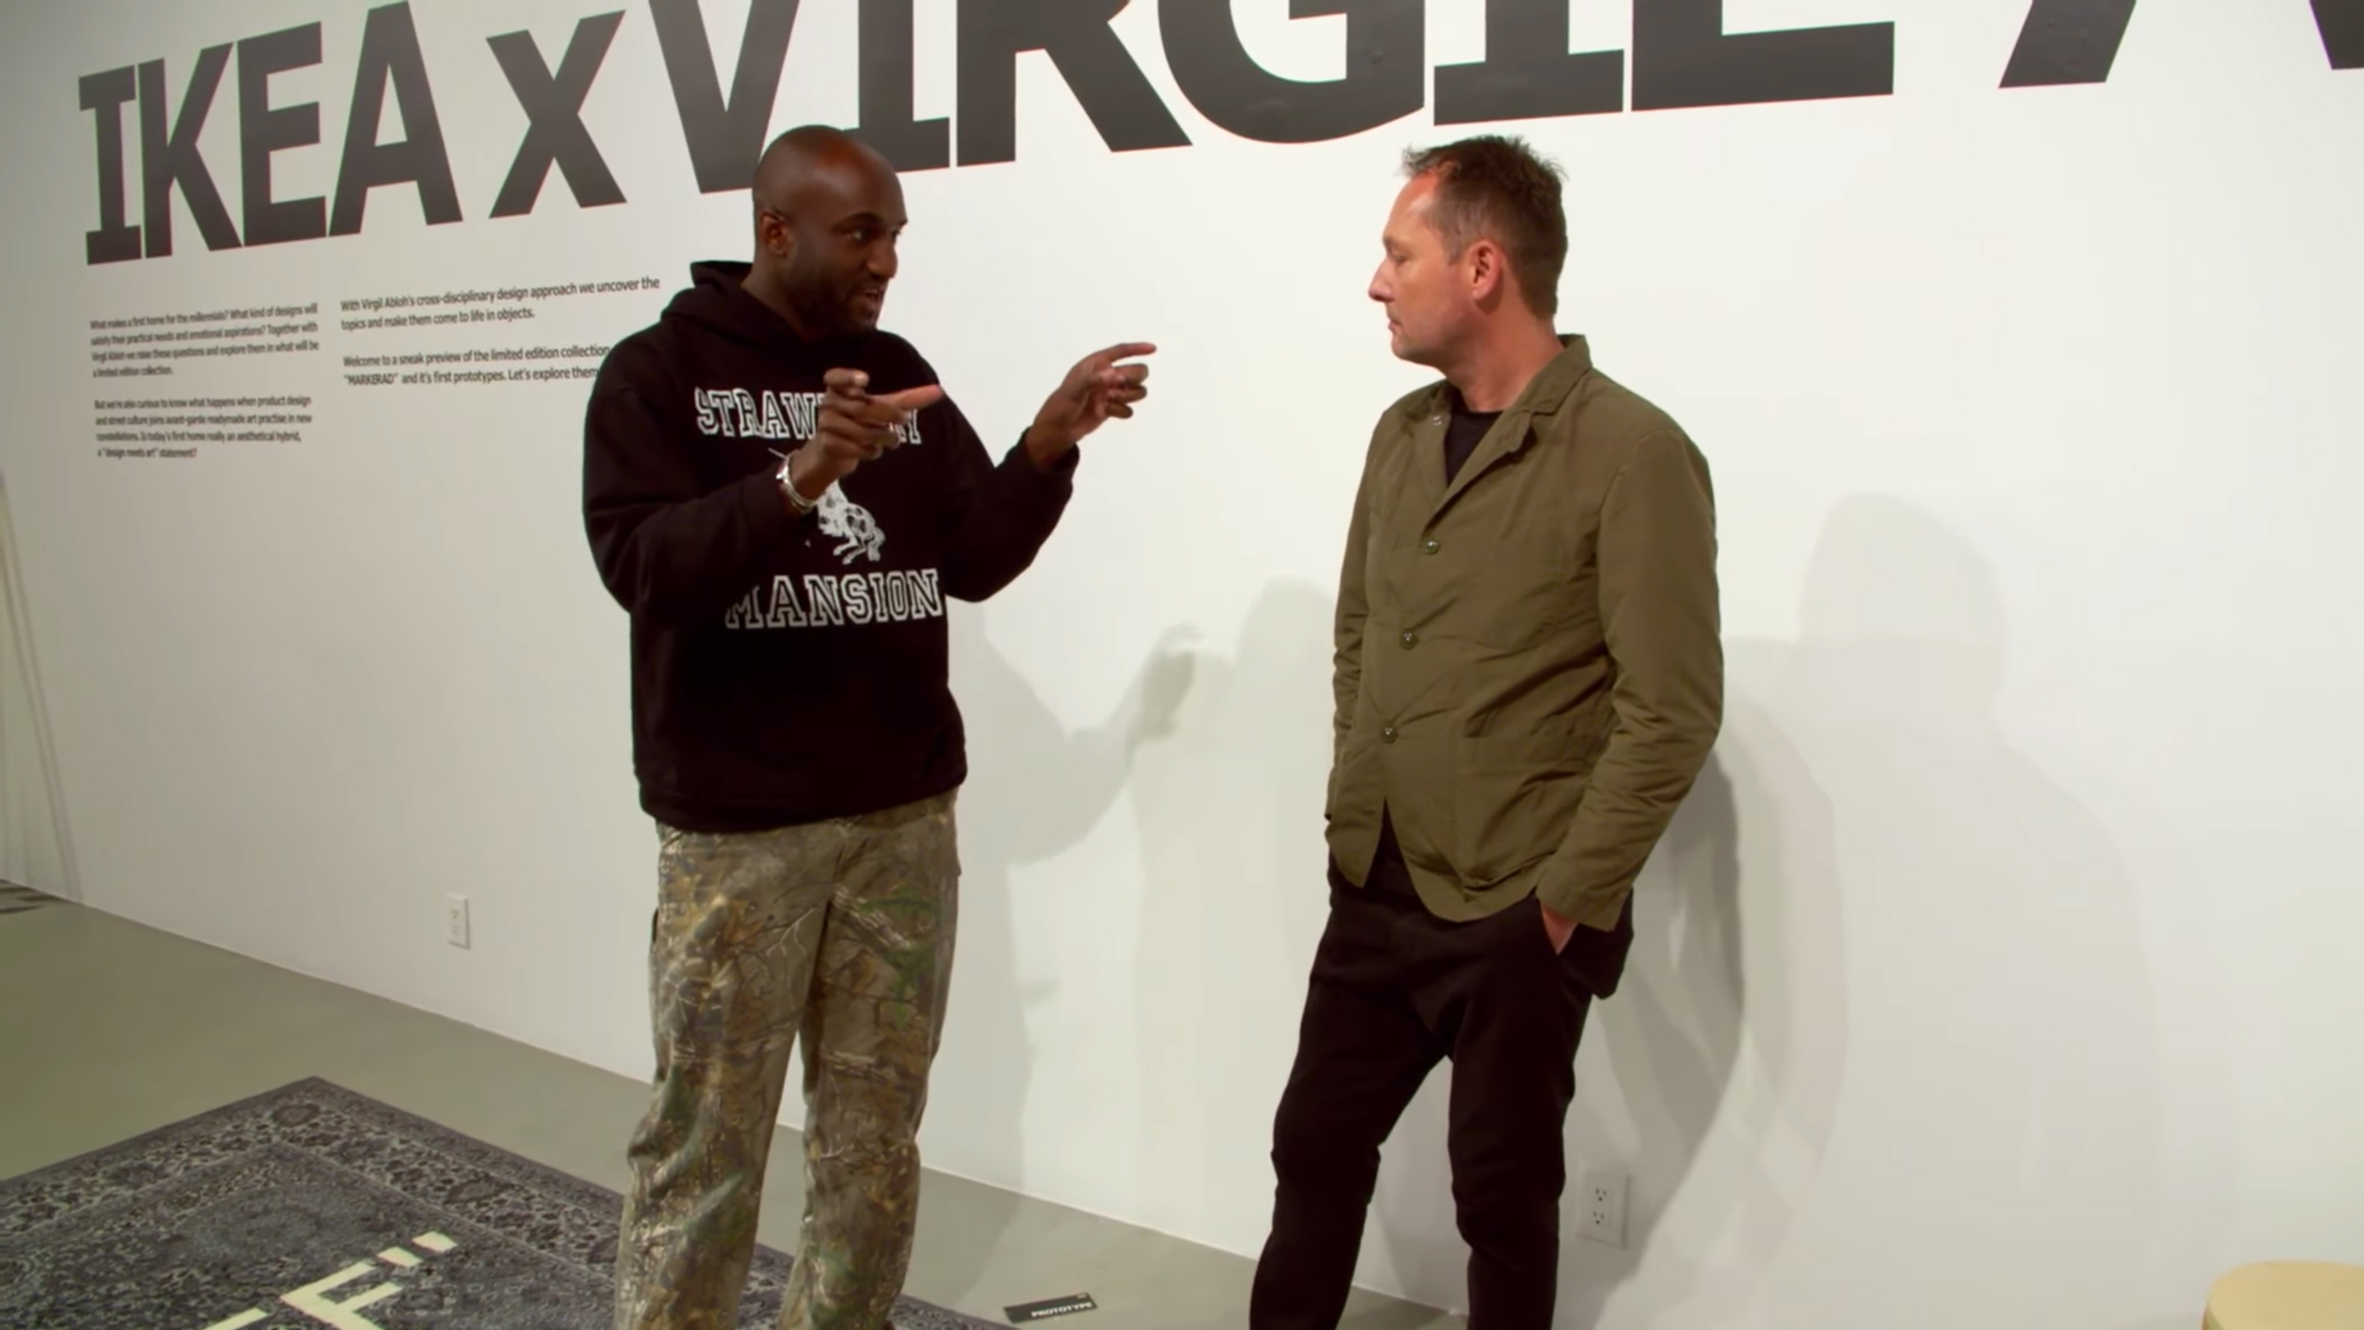 virgil abloh discusses his 'MARKERAD' collection for IKEA